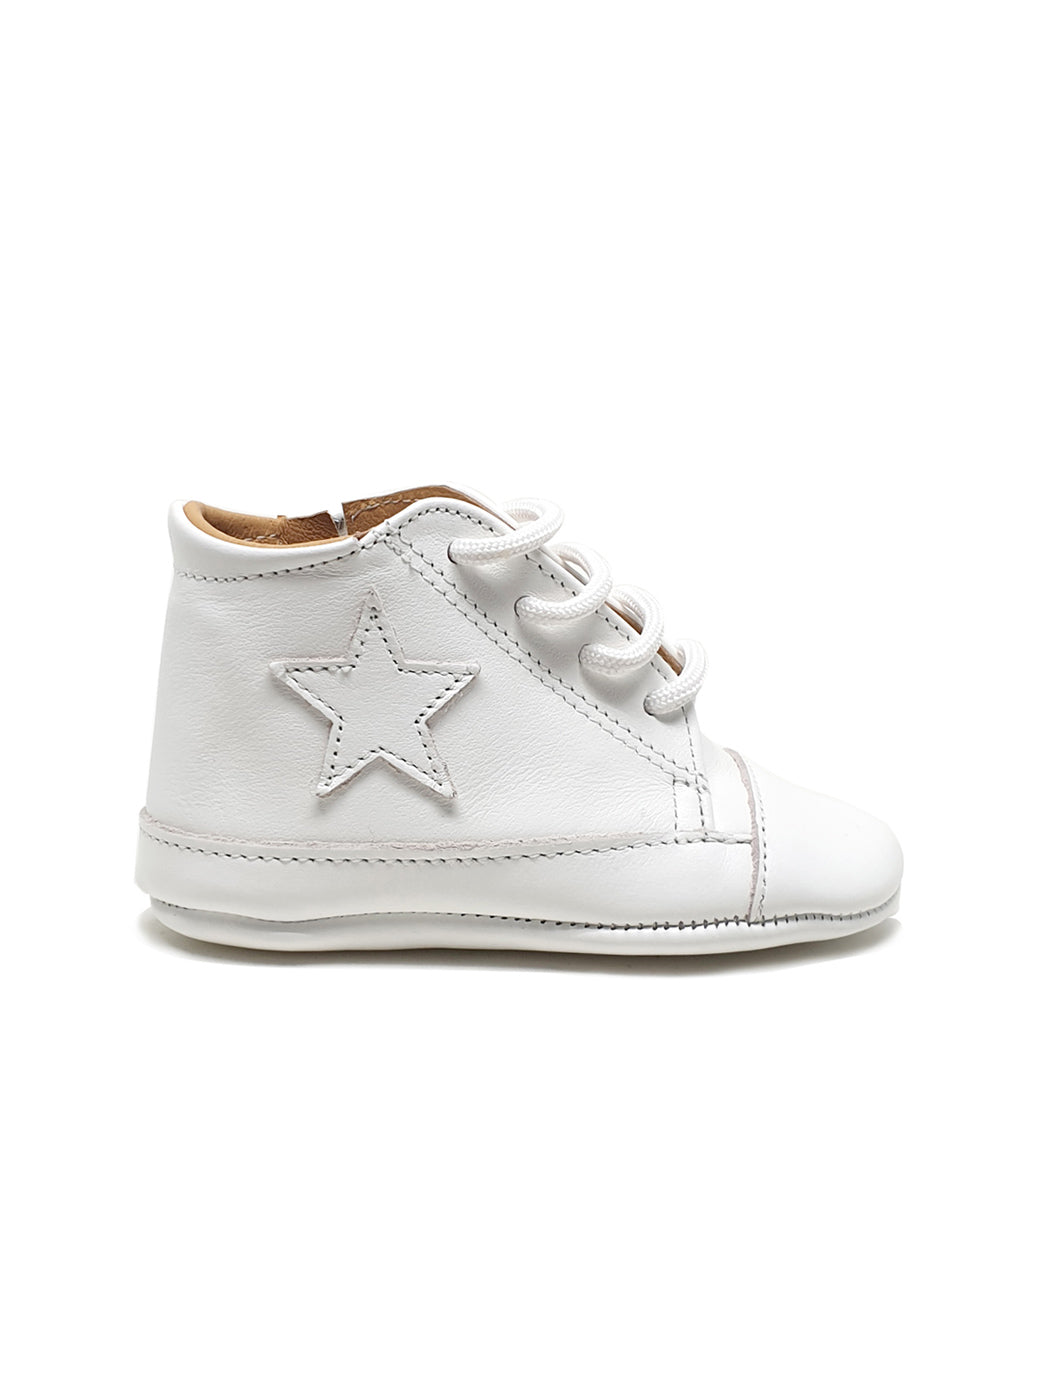 Baptismal leather booties for baby-PR-M128